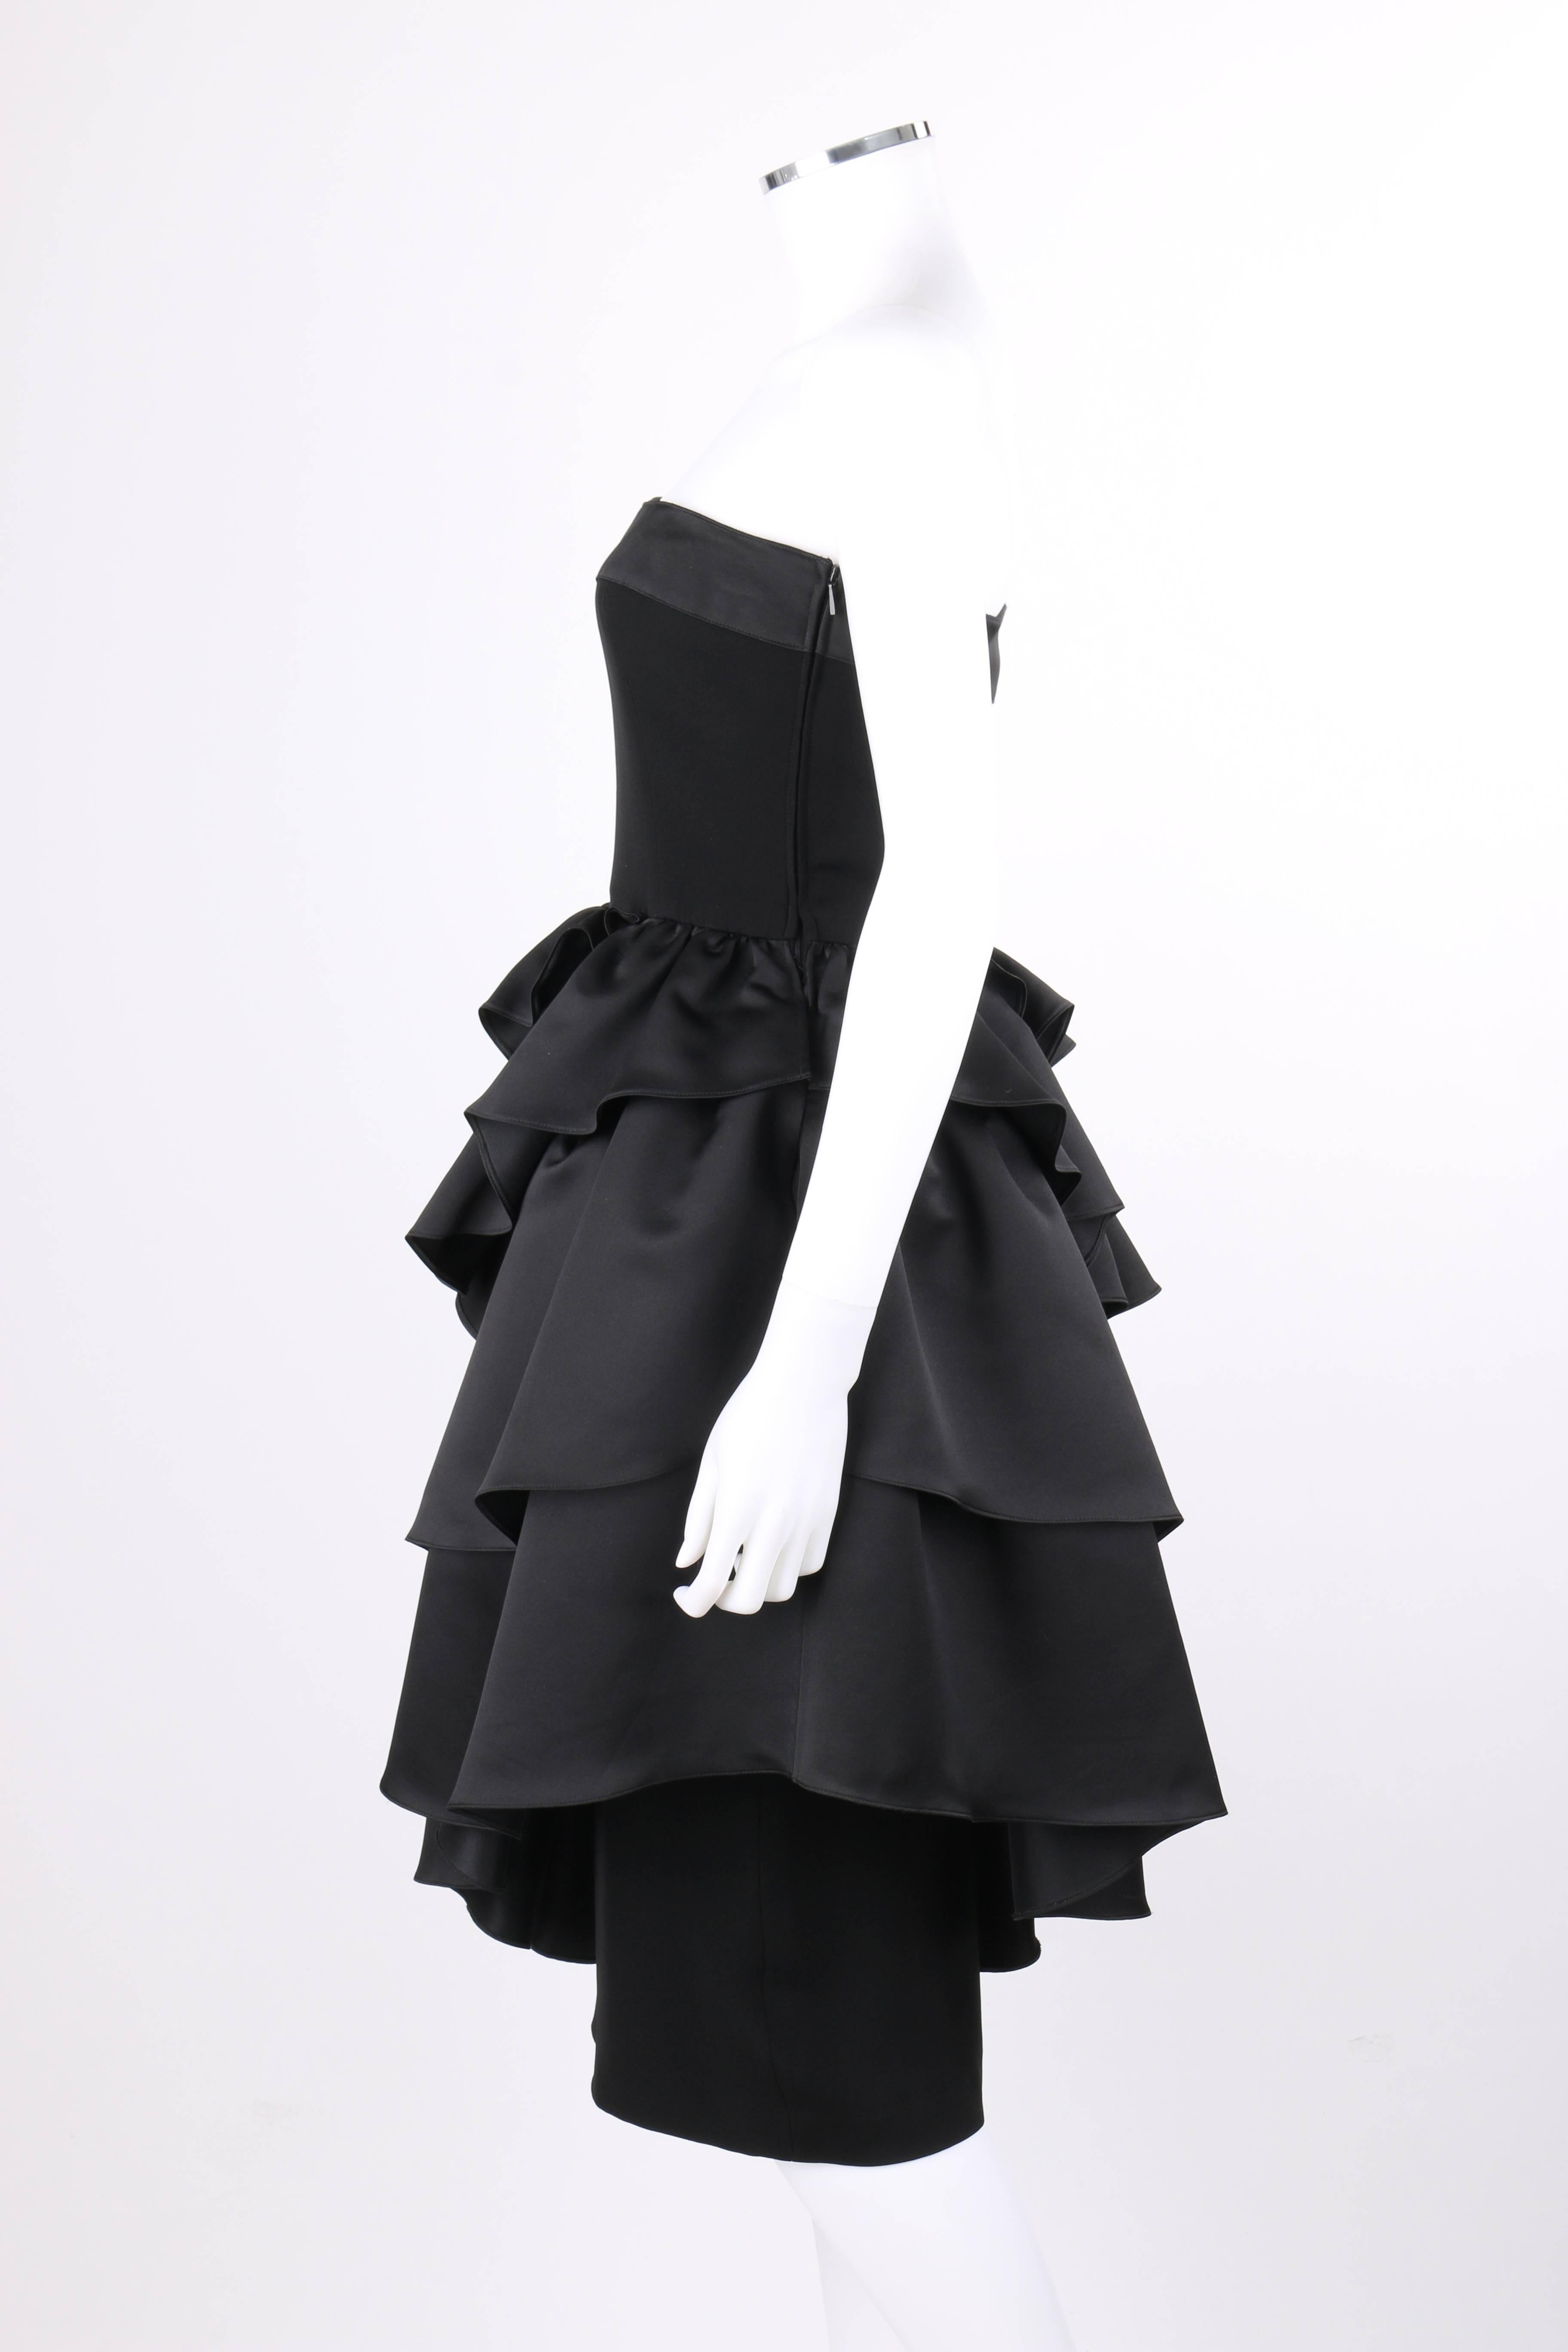 LOUIS FERAUD c.1980's Black Asymmetrical Tiered Ruffle Cocktail Dress In Excellent Condition For Sale In Thiensville, WI